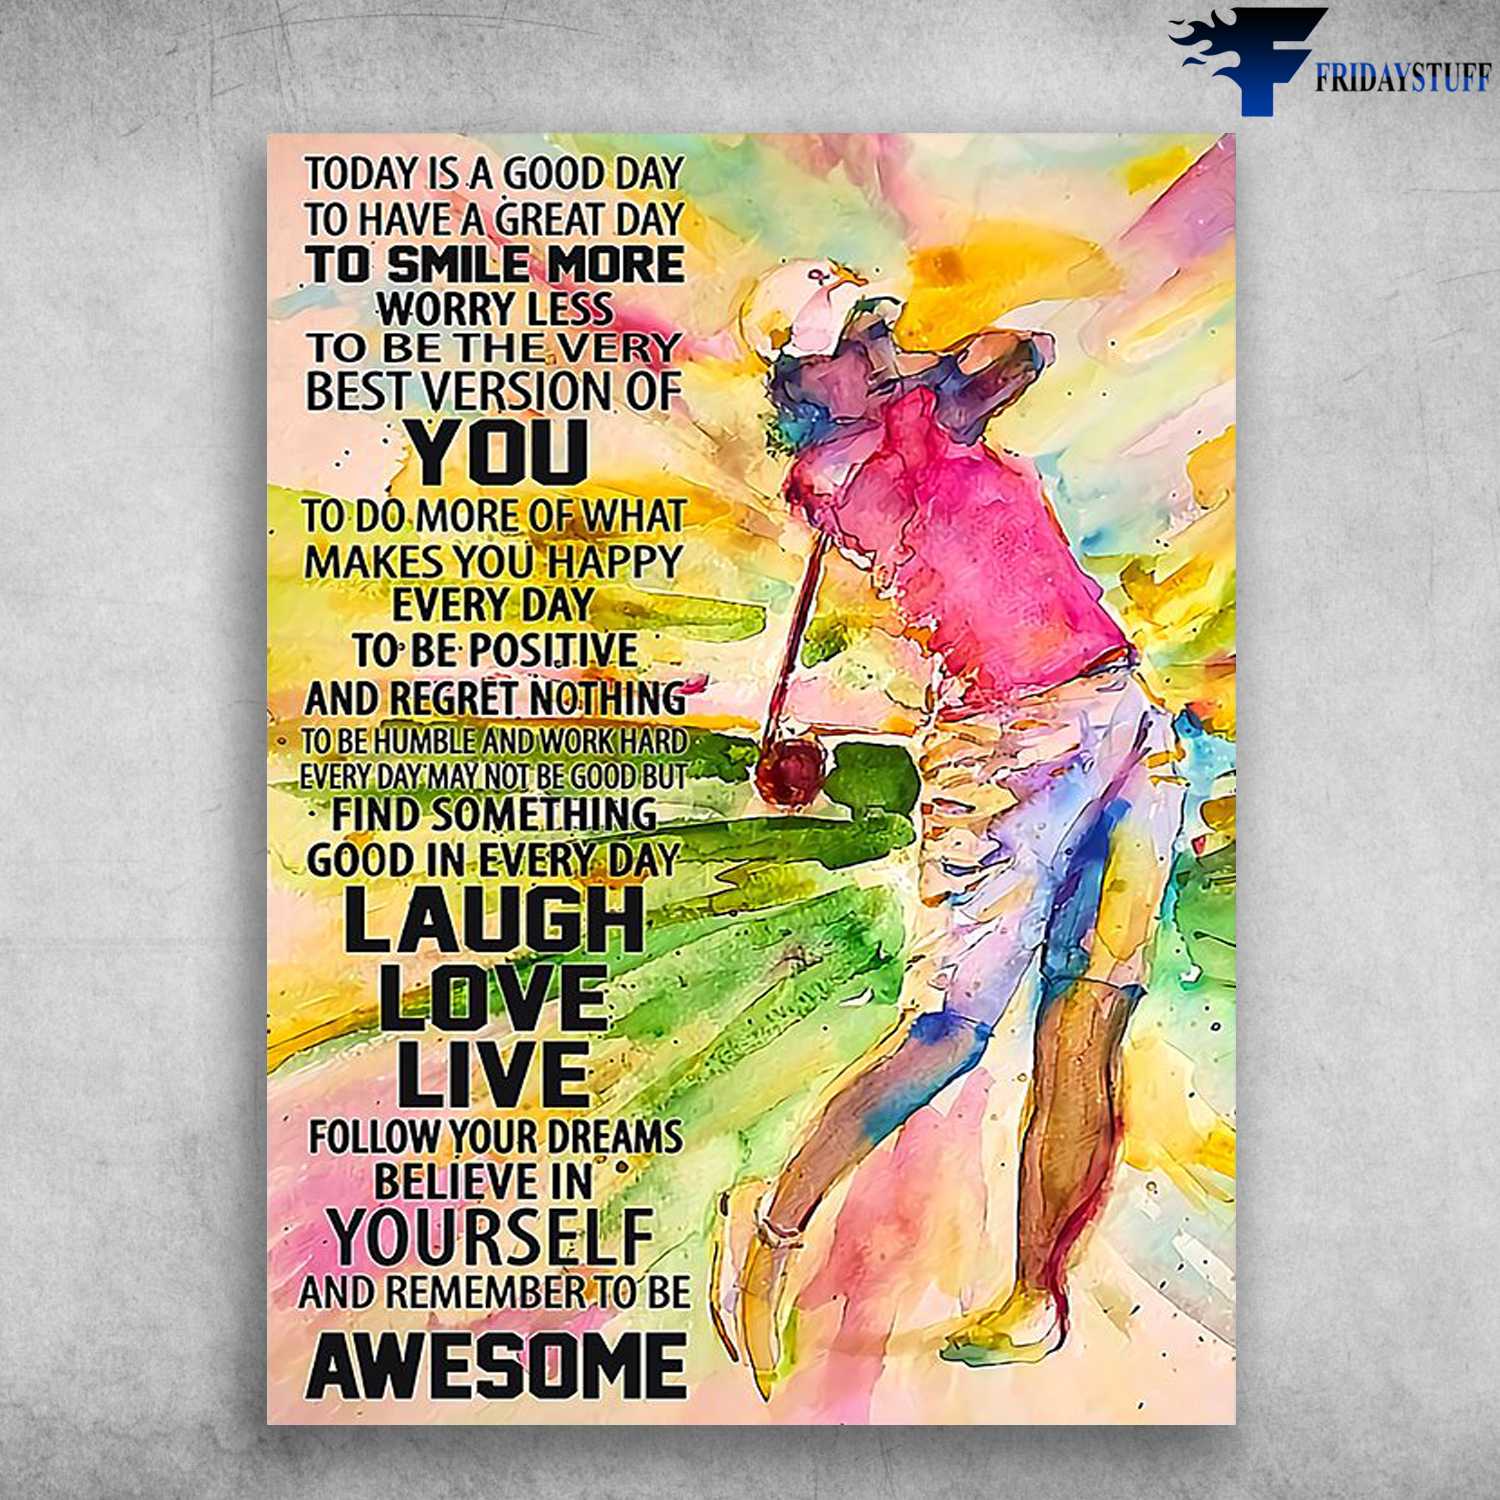 Golf Player, Golf Man - Today Is A Good Day, To Have A Great Day, To Smile More Worry Less, To Be The Very Best Version Of You